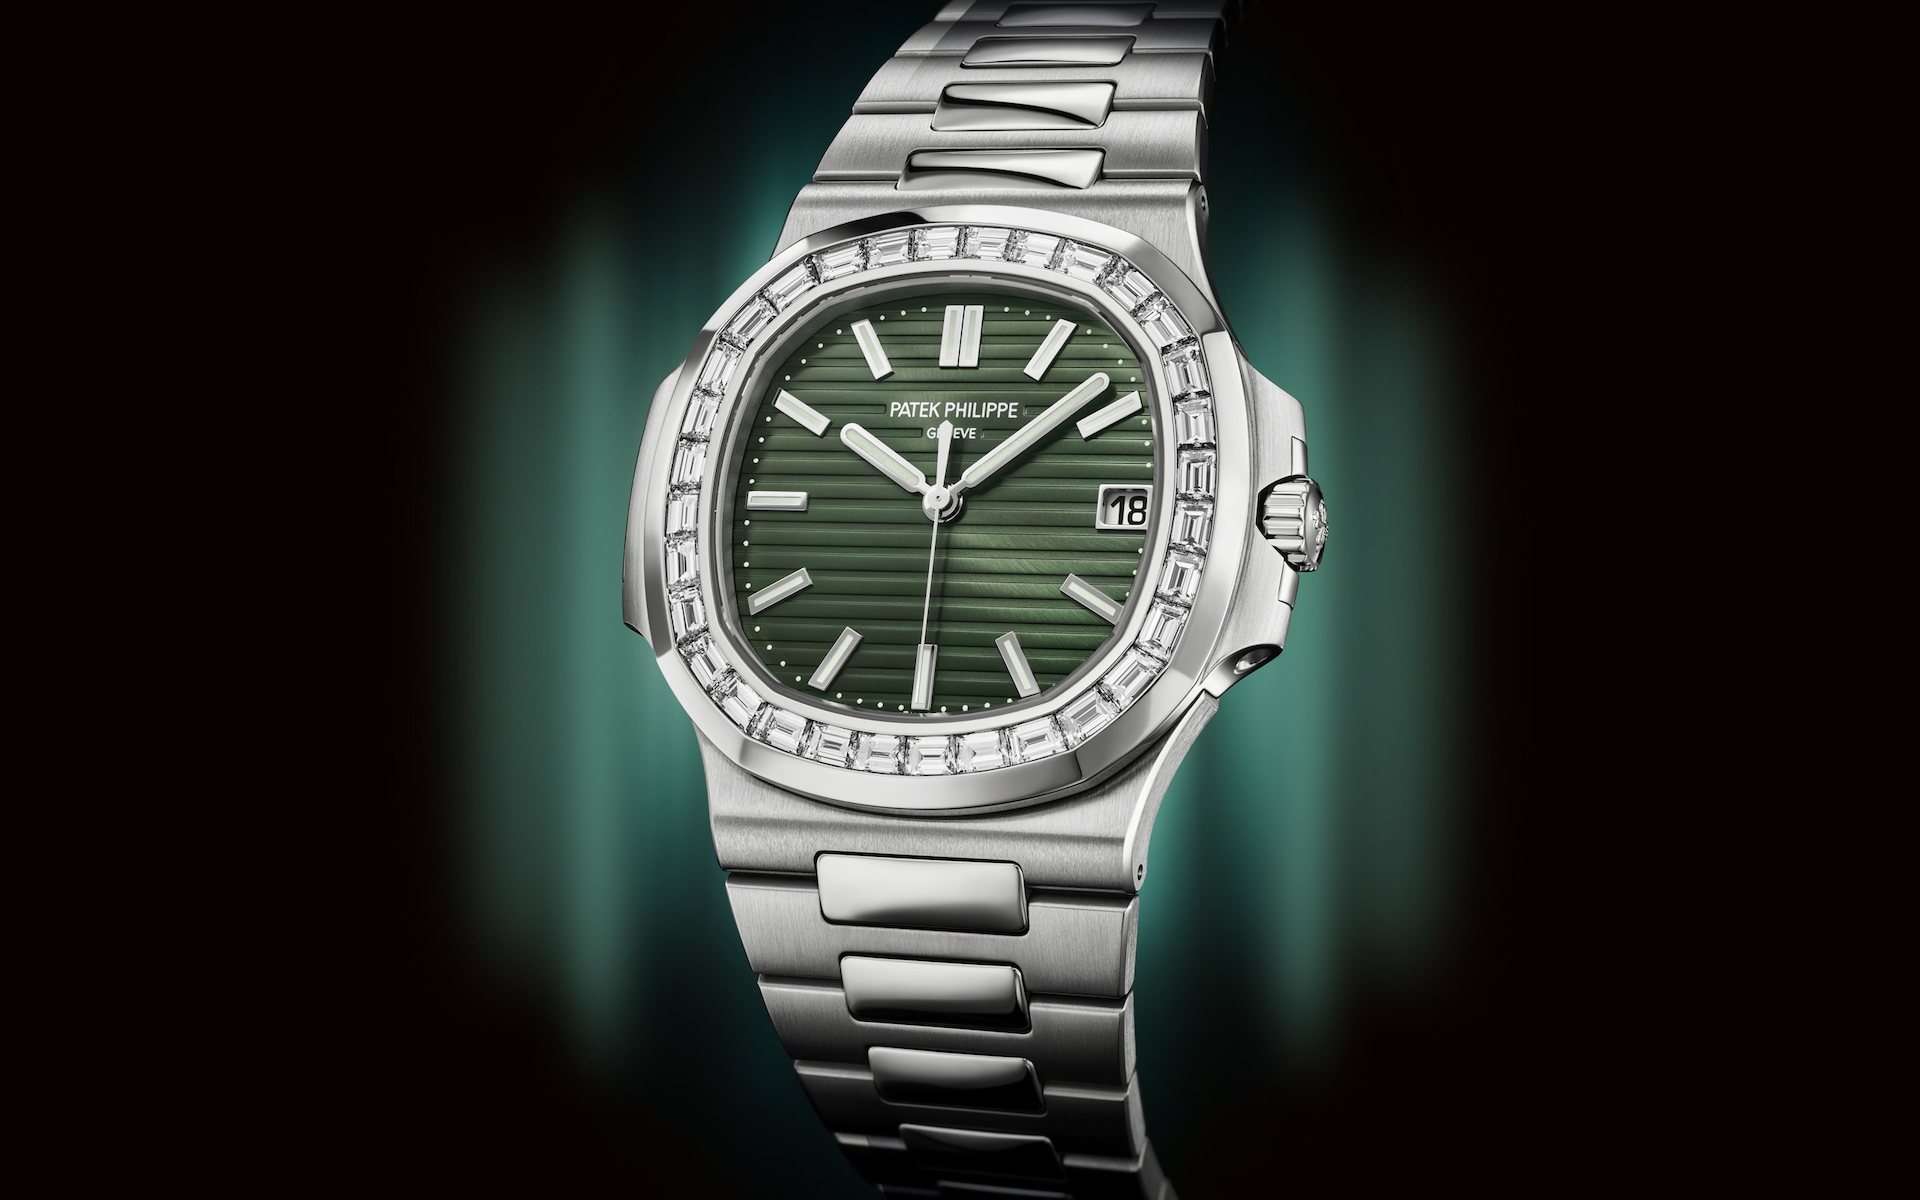 Patek Philippe's olive green Nautilus being flipped for $363,600, more than  ten times its retail price